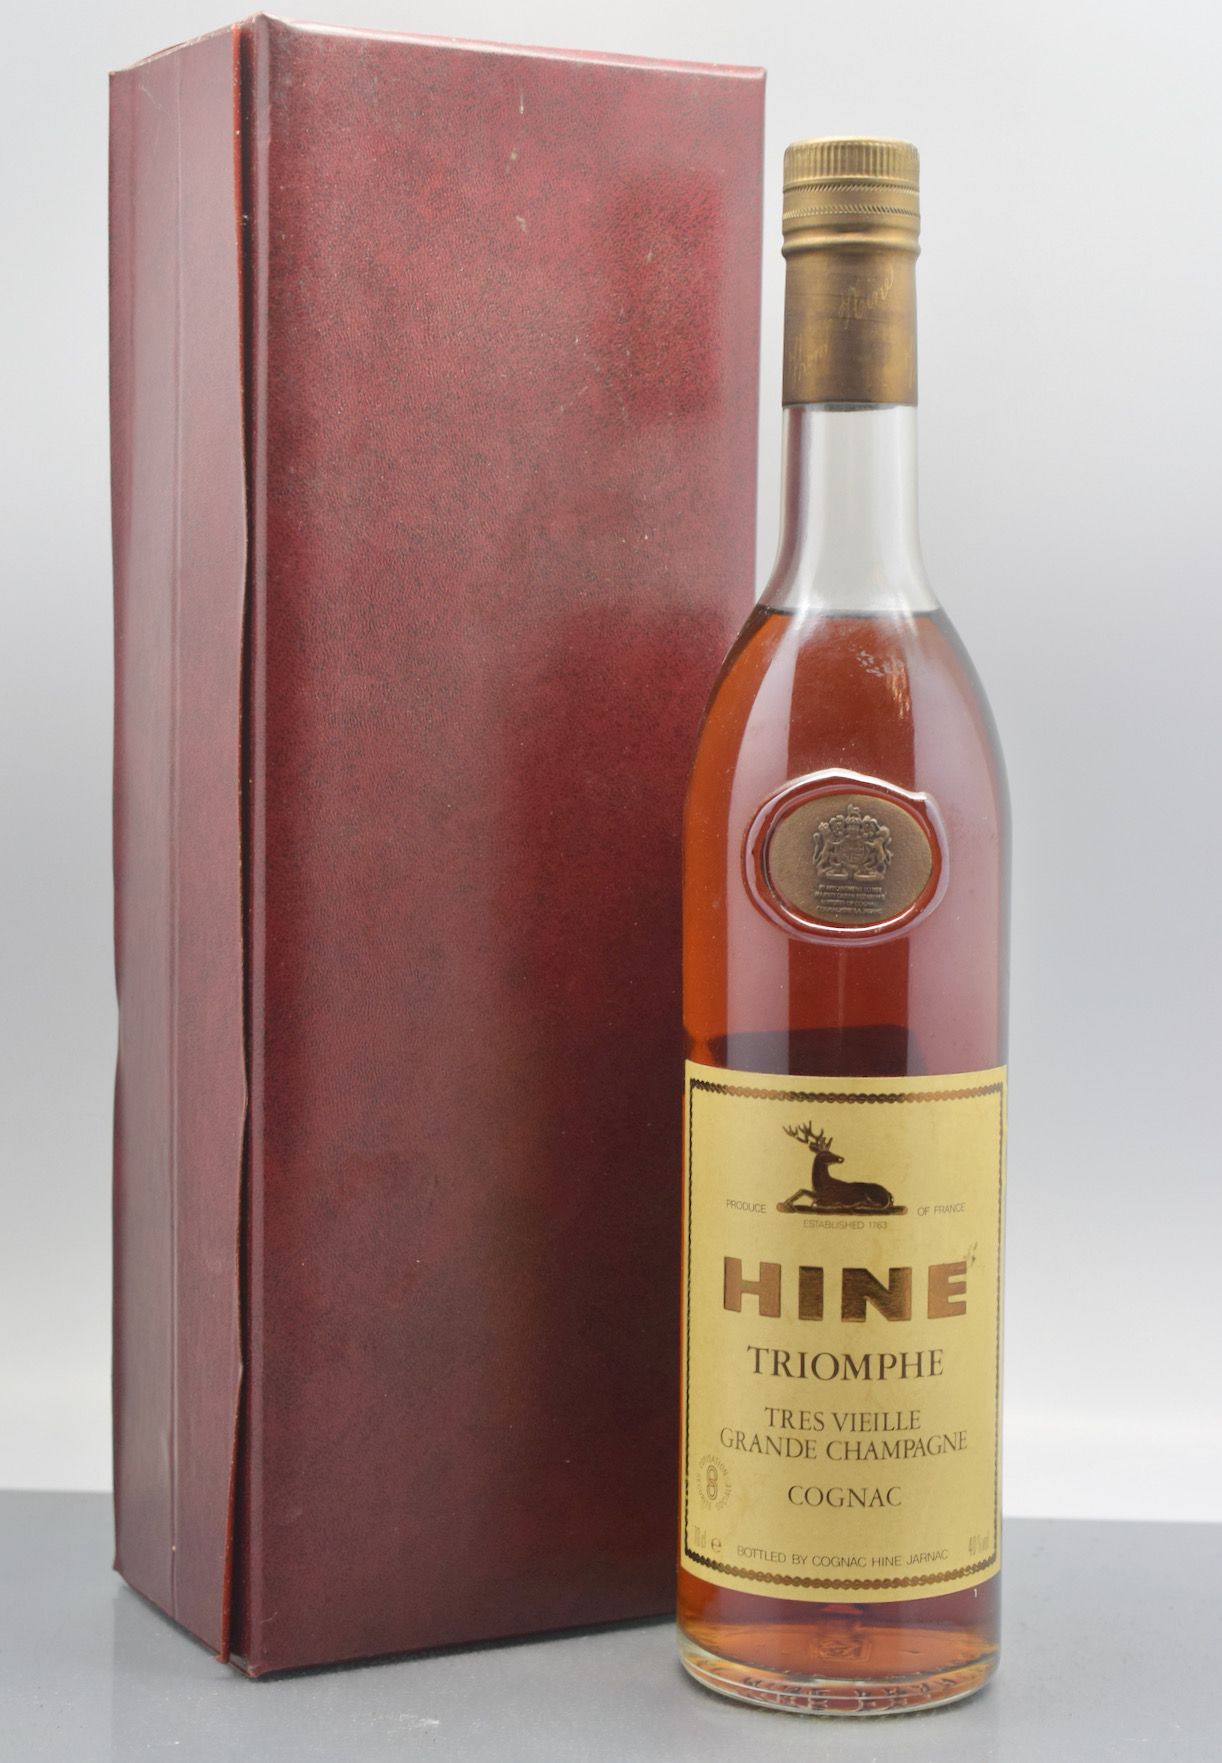 Null 1瓶COGNAC "Triomphe", Hine (Very old Grande Champagne, elt) in a box